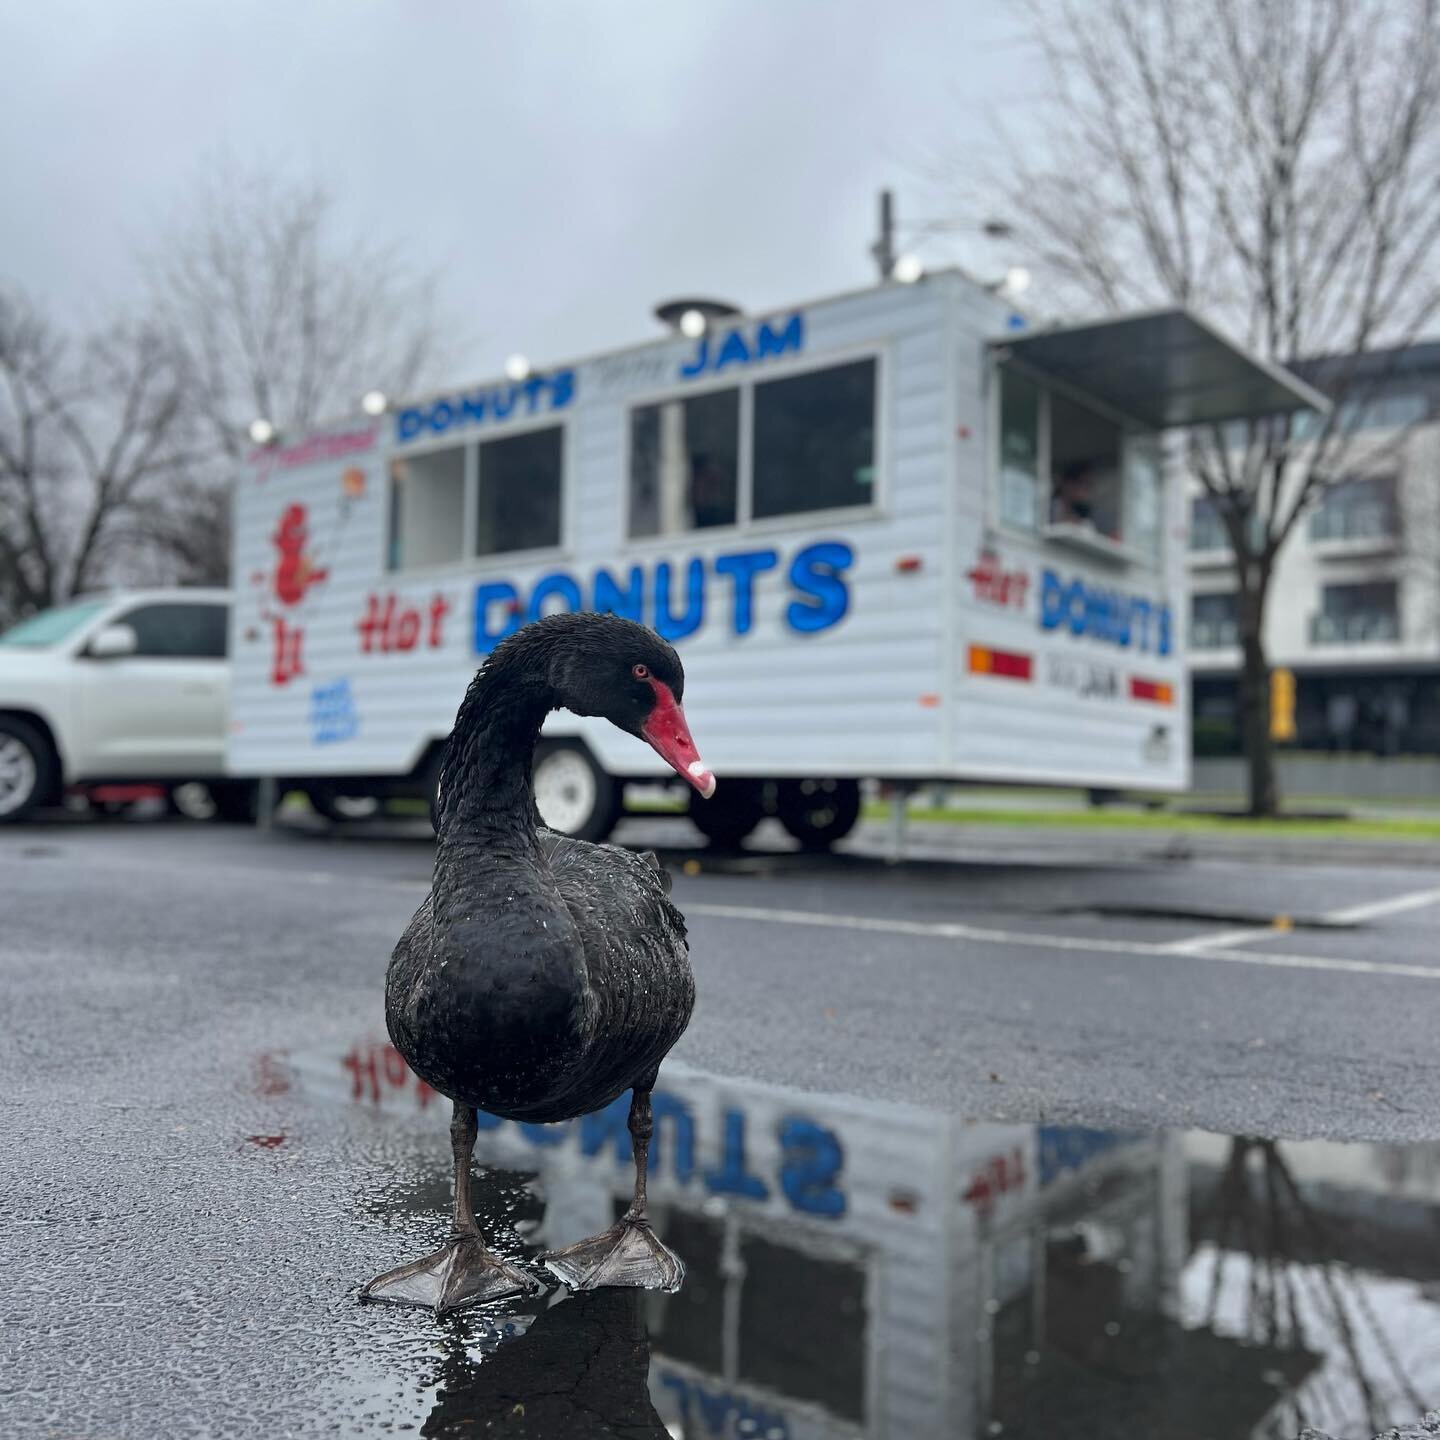 📍Lake Weeroona today&hellip;

8:30am - 5:30pm

📣 Buy 5 donuts &amp; get the 6th FREE! 
📣 Buy 10 donuts &amp; get another 2 FREE!
&hellip;the more donuts you buy, the more you get FREE 🤫

P.s. Curtis the swan has already eaten most of them this mo